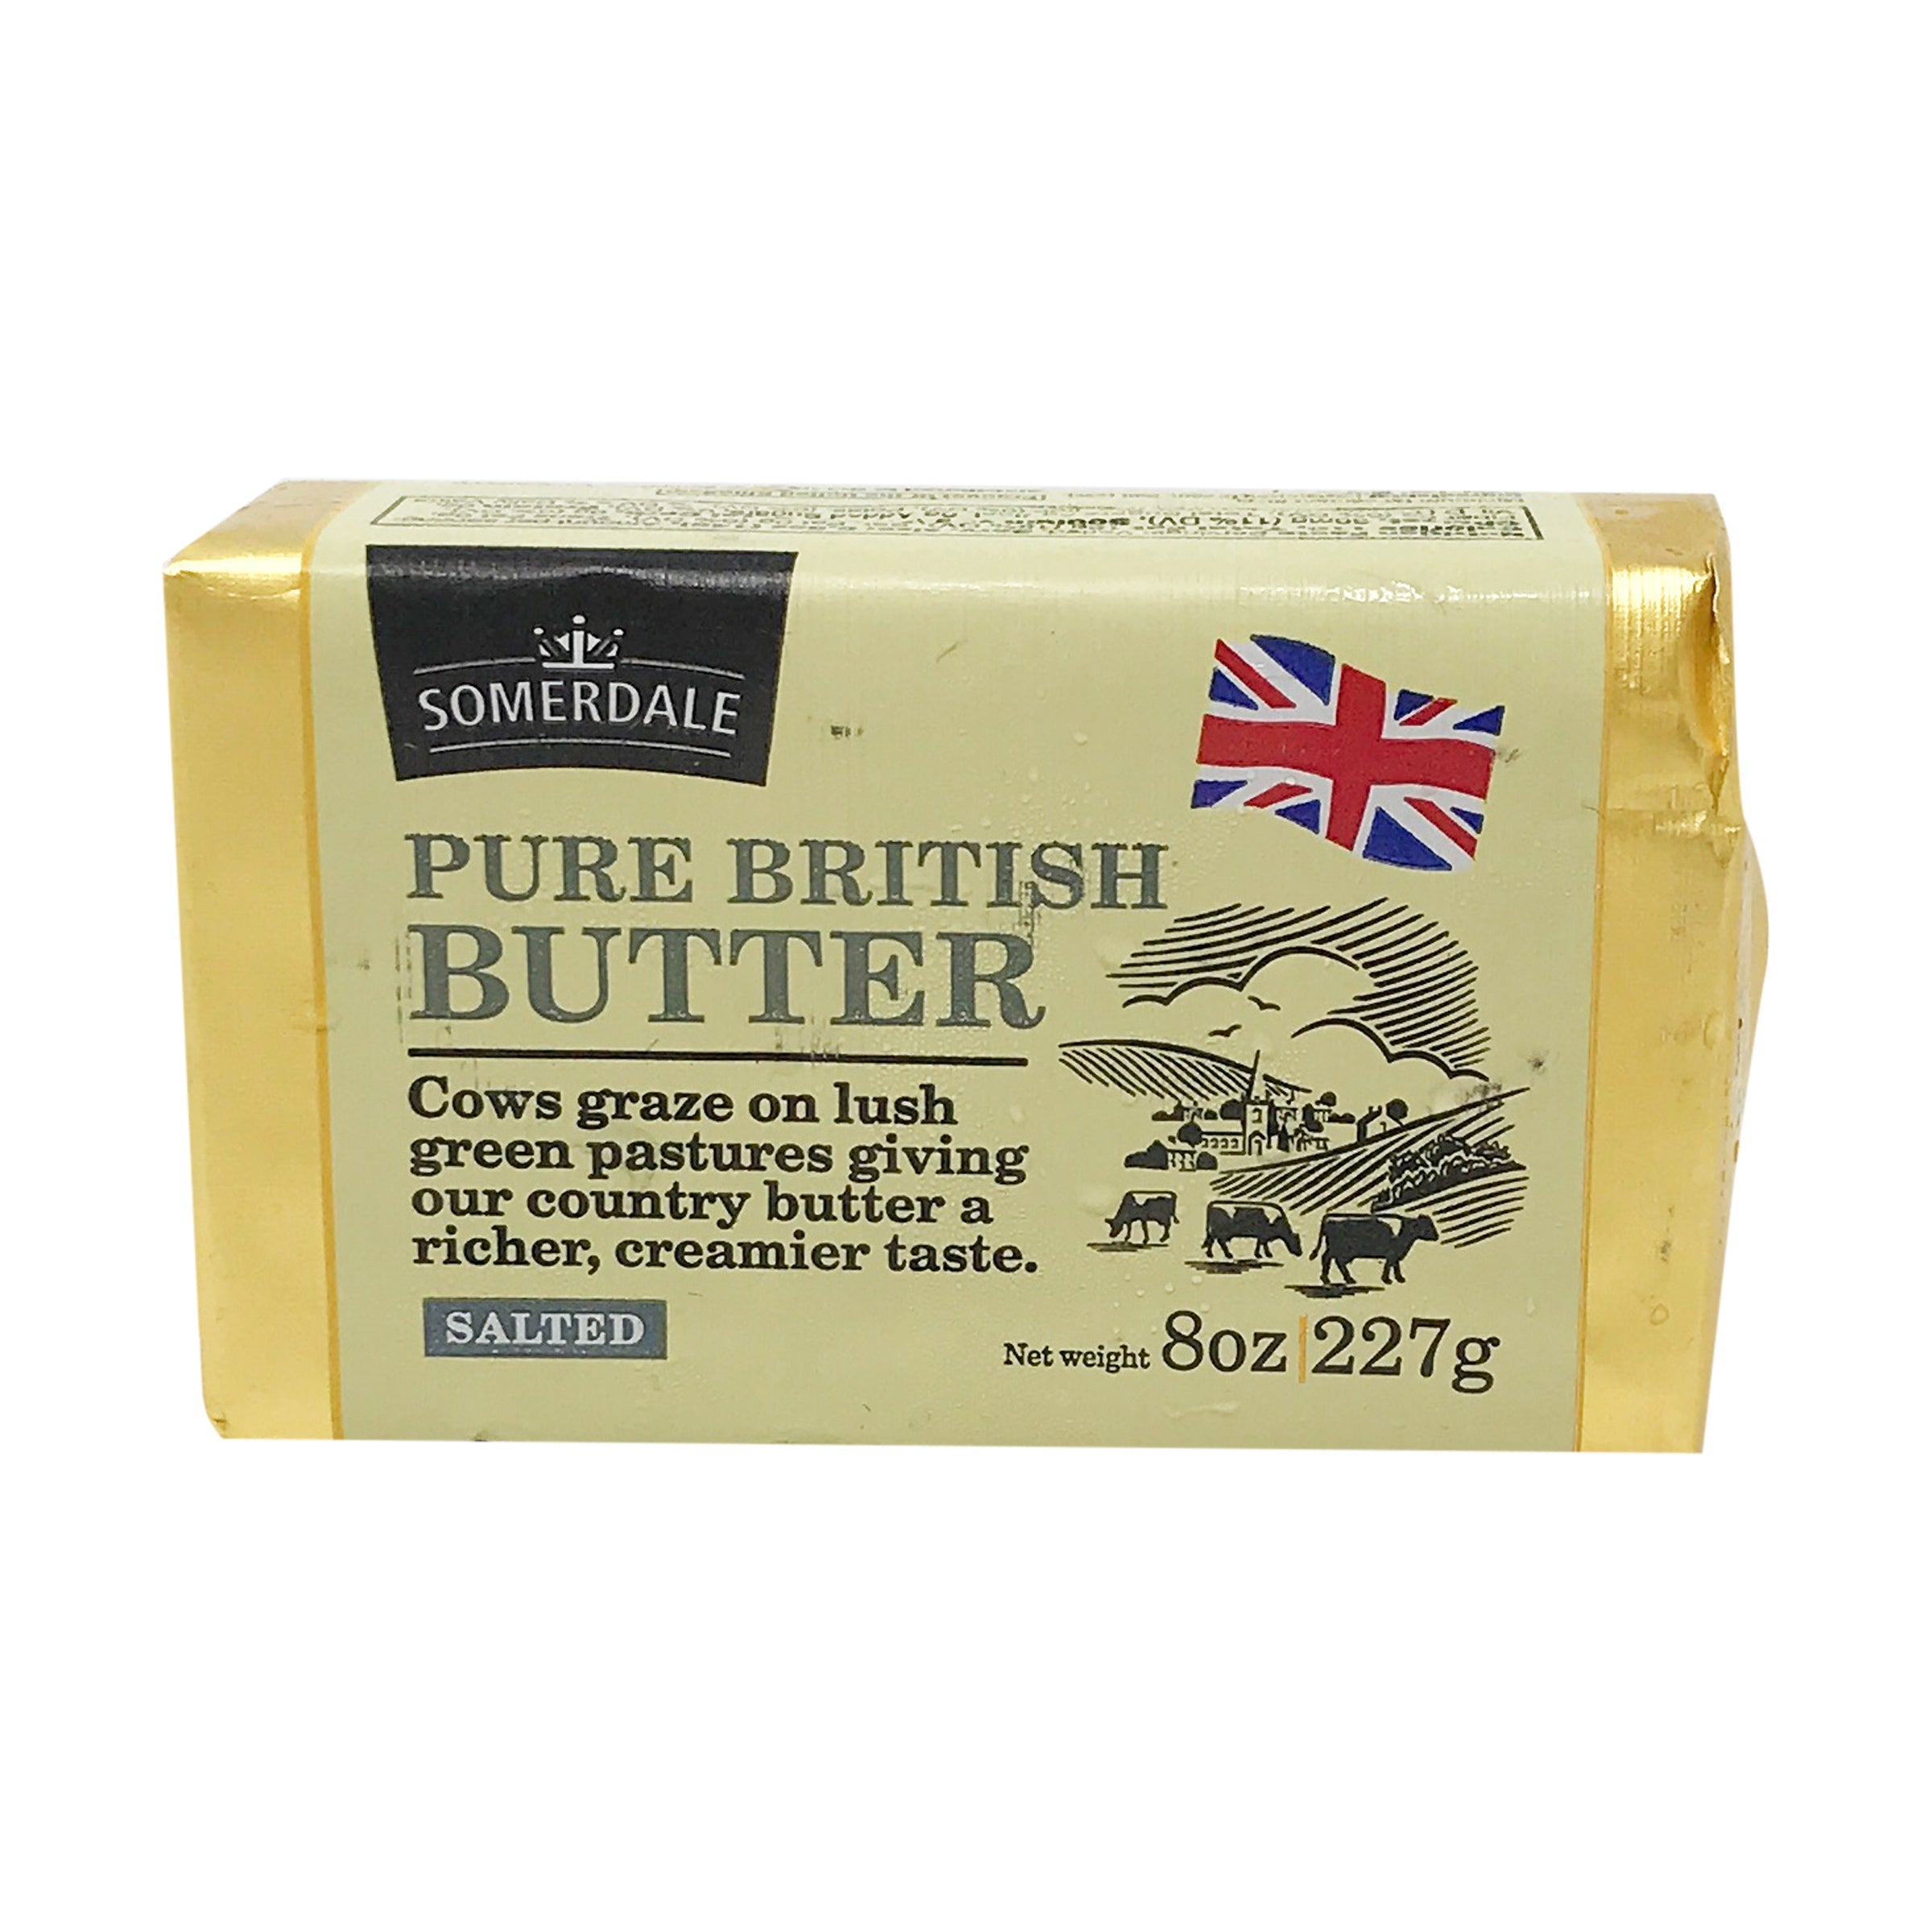 Somerdale Pure British Butter Salted 8 oz